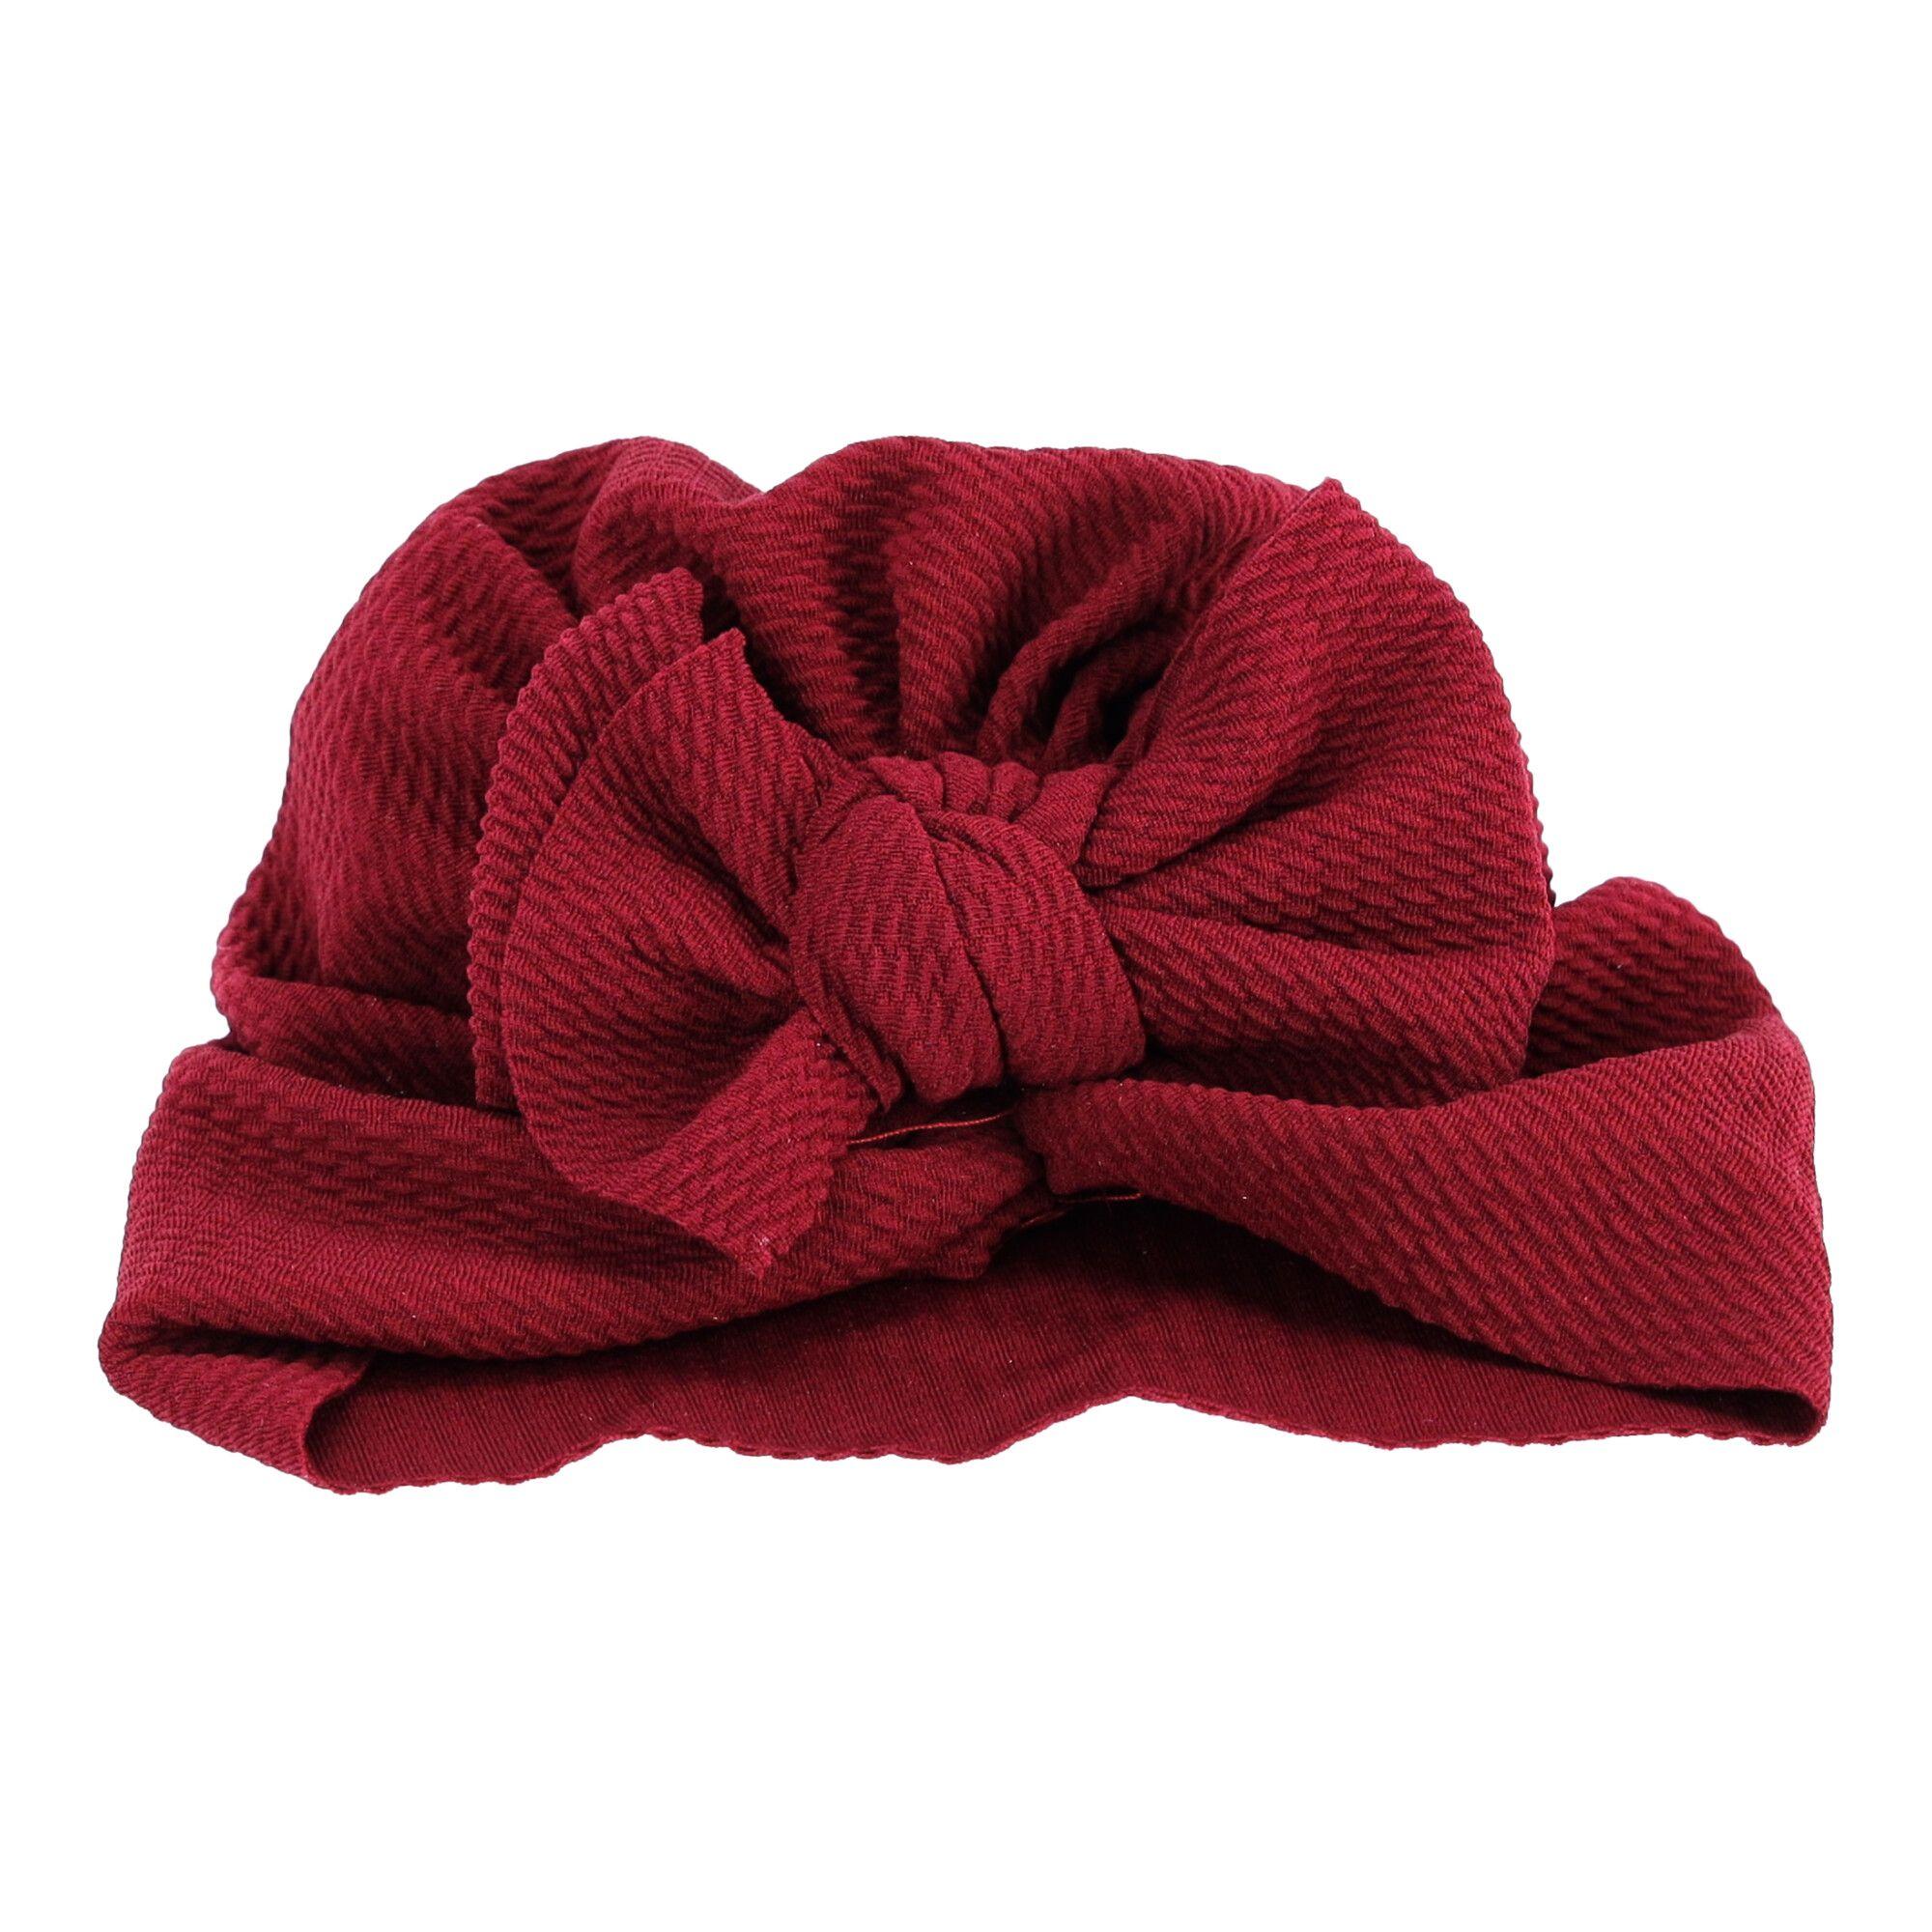 Baby turban with a bow, girl's hat - wine red